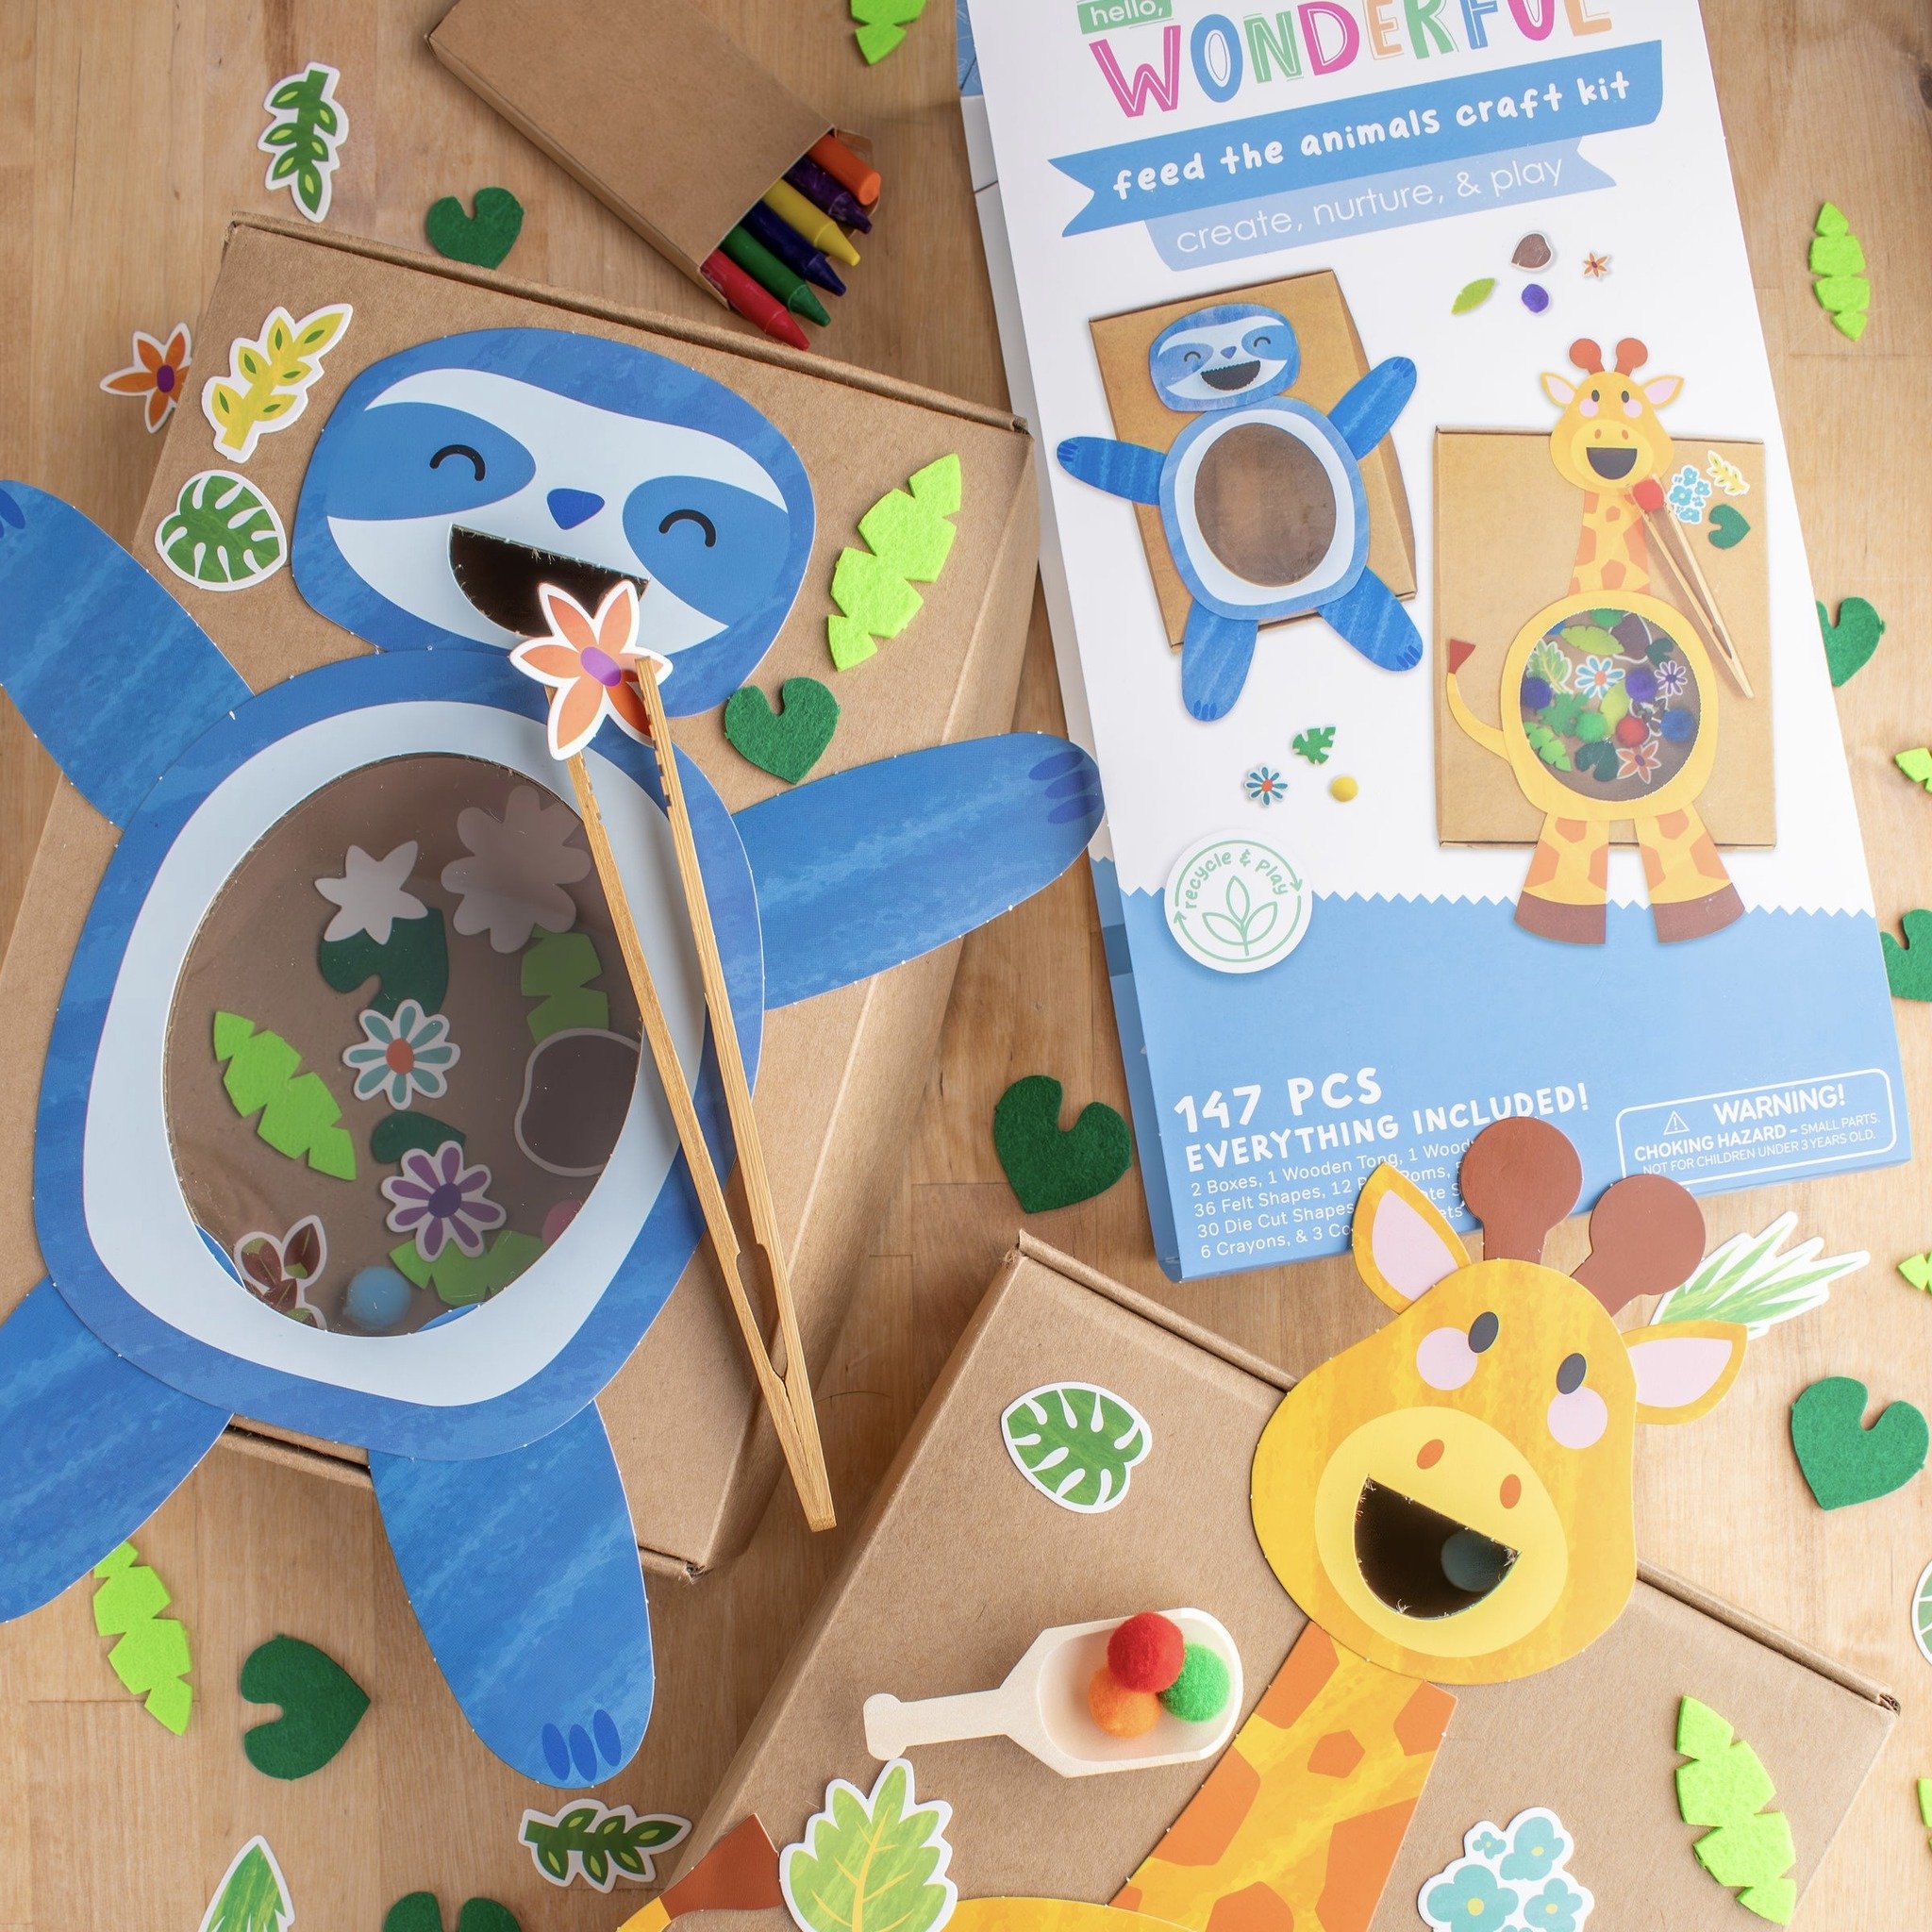 🌎 HAPPY EARTH DAY! 🌎 To celebrate, we thought this was the perfect time to announce the launch of our co-branded line of kid's craft &amp; play kits with @hellowonderful_co ! All made with a planet-friendly approach, the line encompasses tree-house